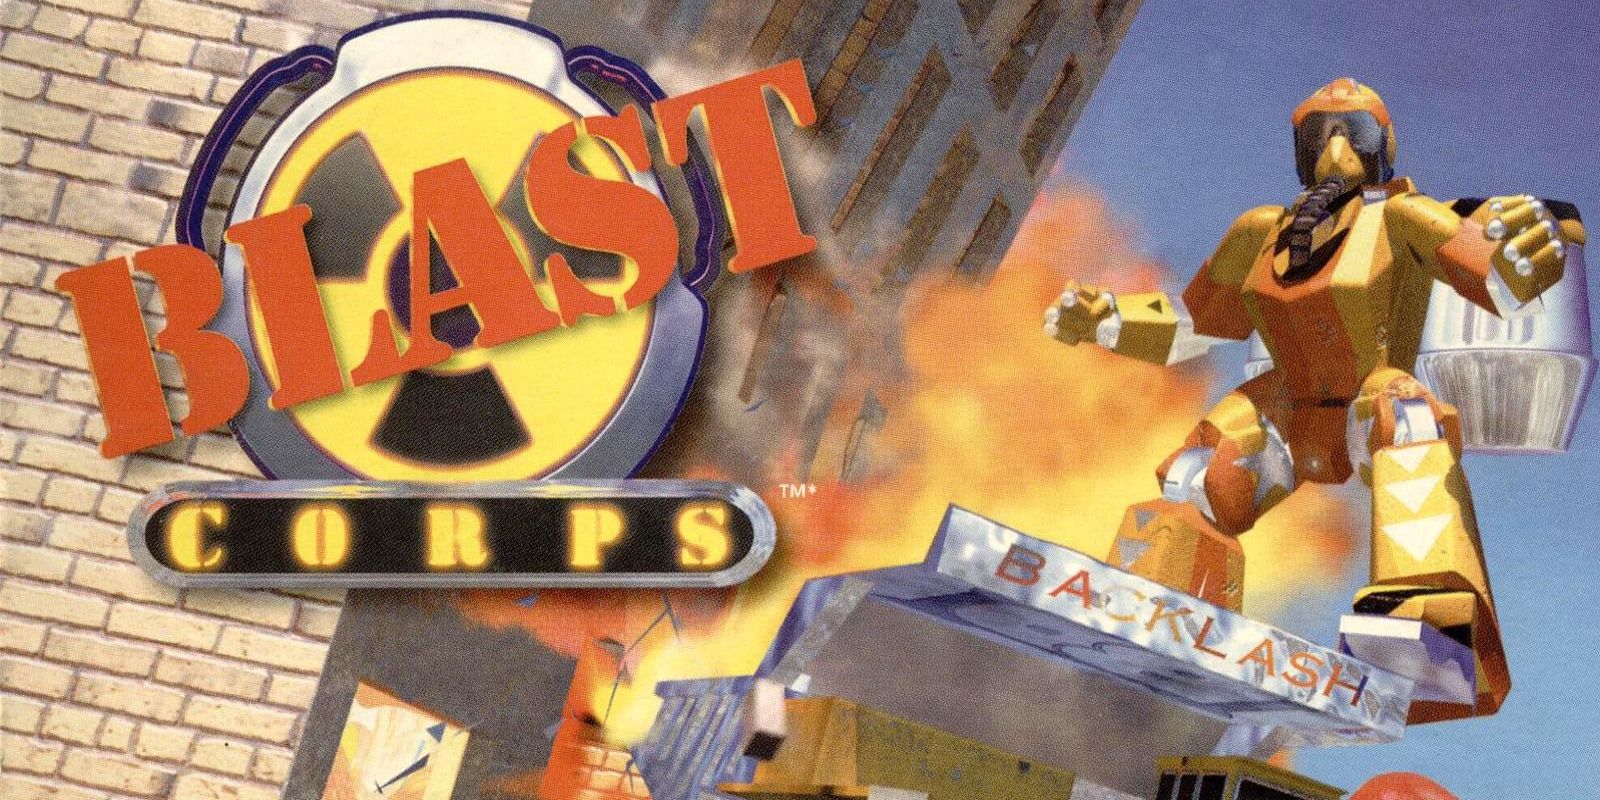 A robot in front of an explosion with the Blast Corps logo next to it